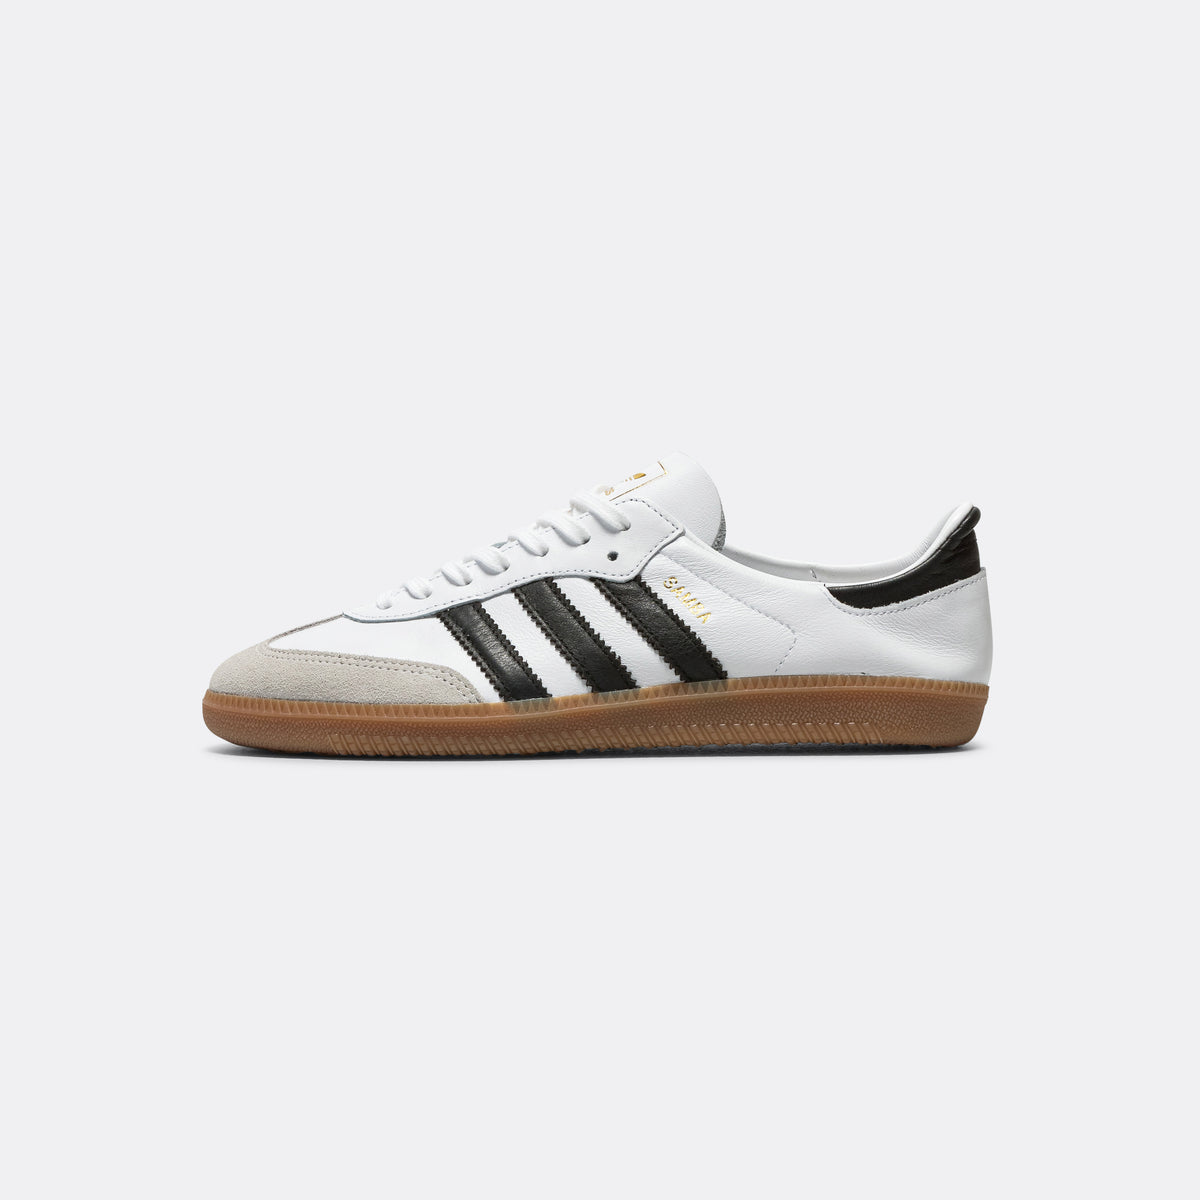 adidas Samba Collapsible - Footwear White/Core Black | UP THERE